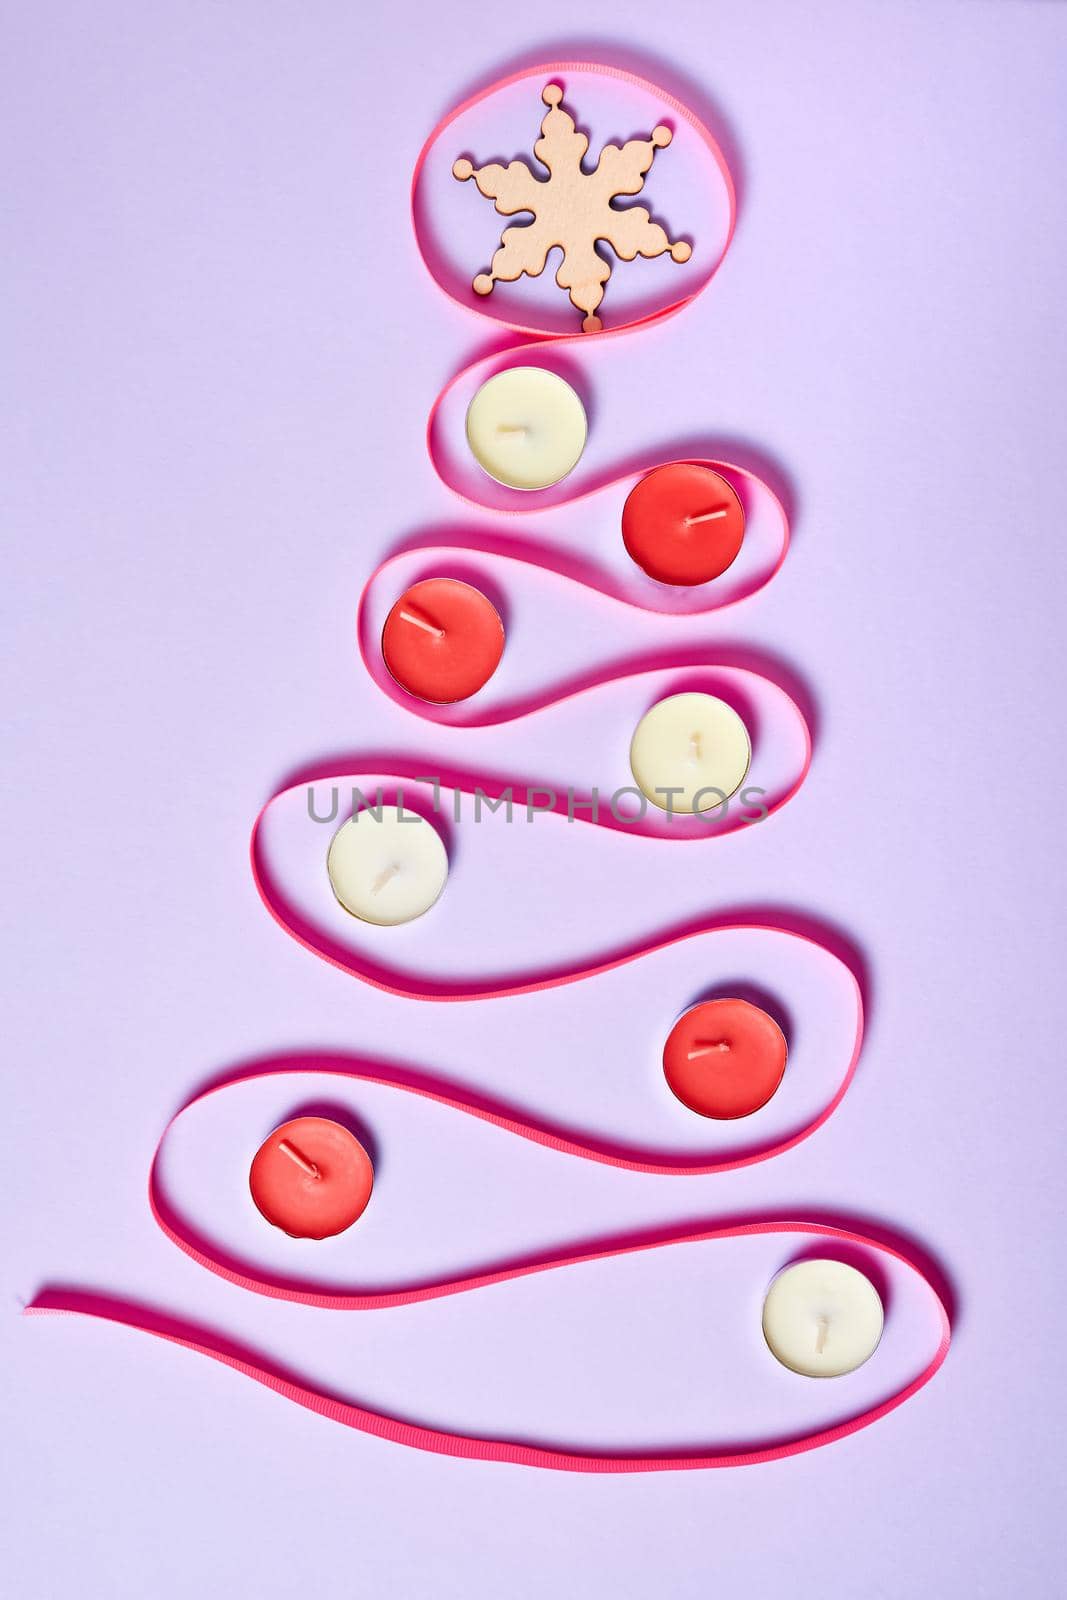 Christmas tree made of pink ribbon on purple paper background decorated with candles and Snowflake on the top of the tree by marketlan